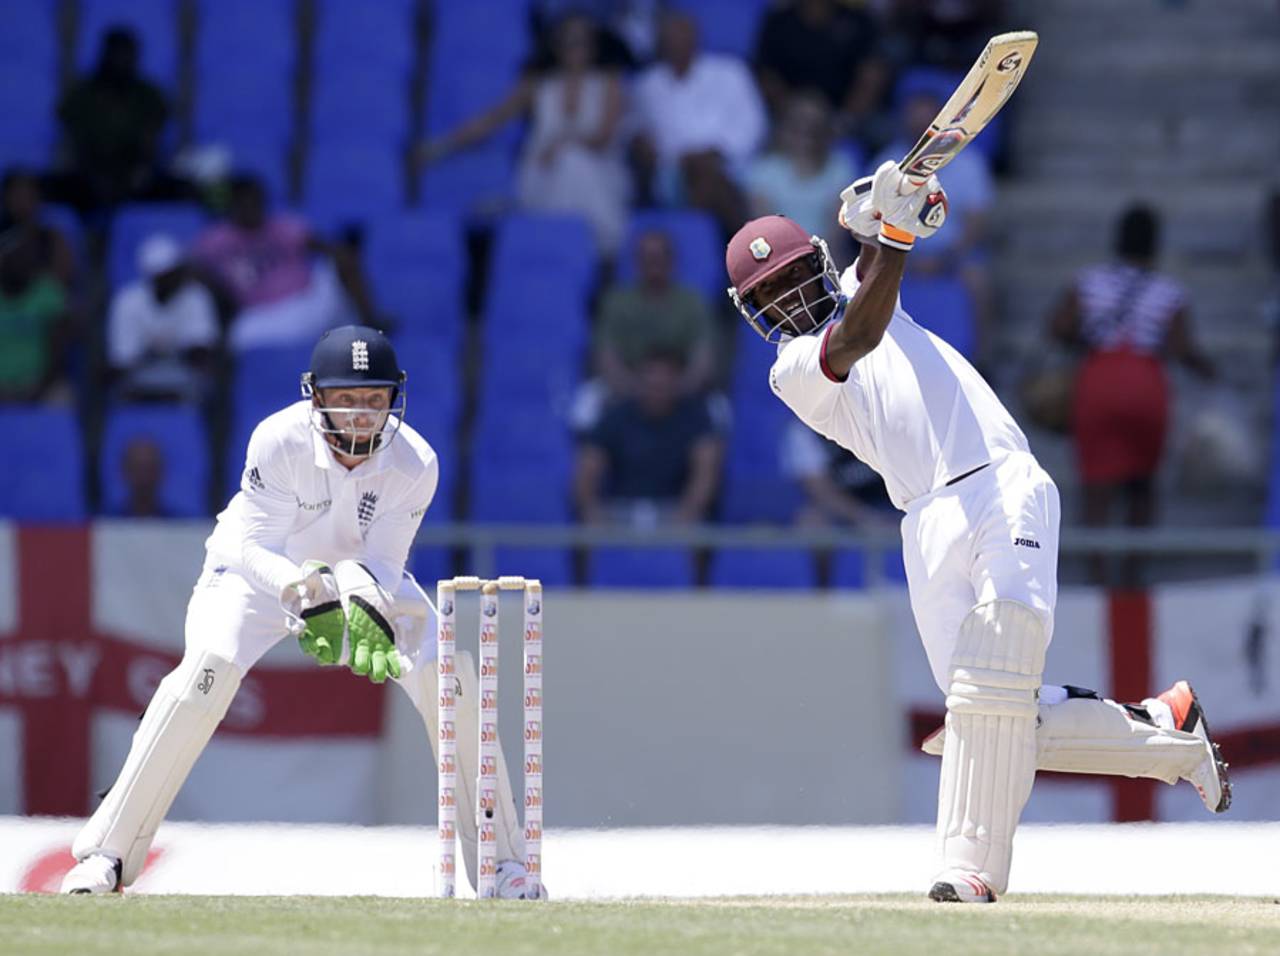 Jermaine Blackwood was not afraid to attack, West Indies v England, 1st Test, North Sound, 3rd day, April 15, 2015